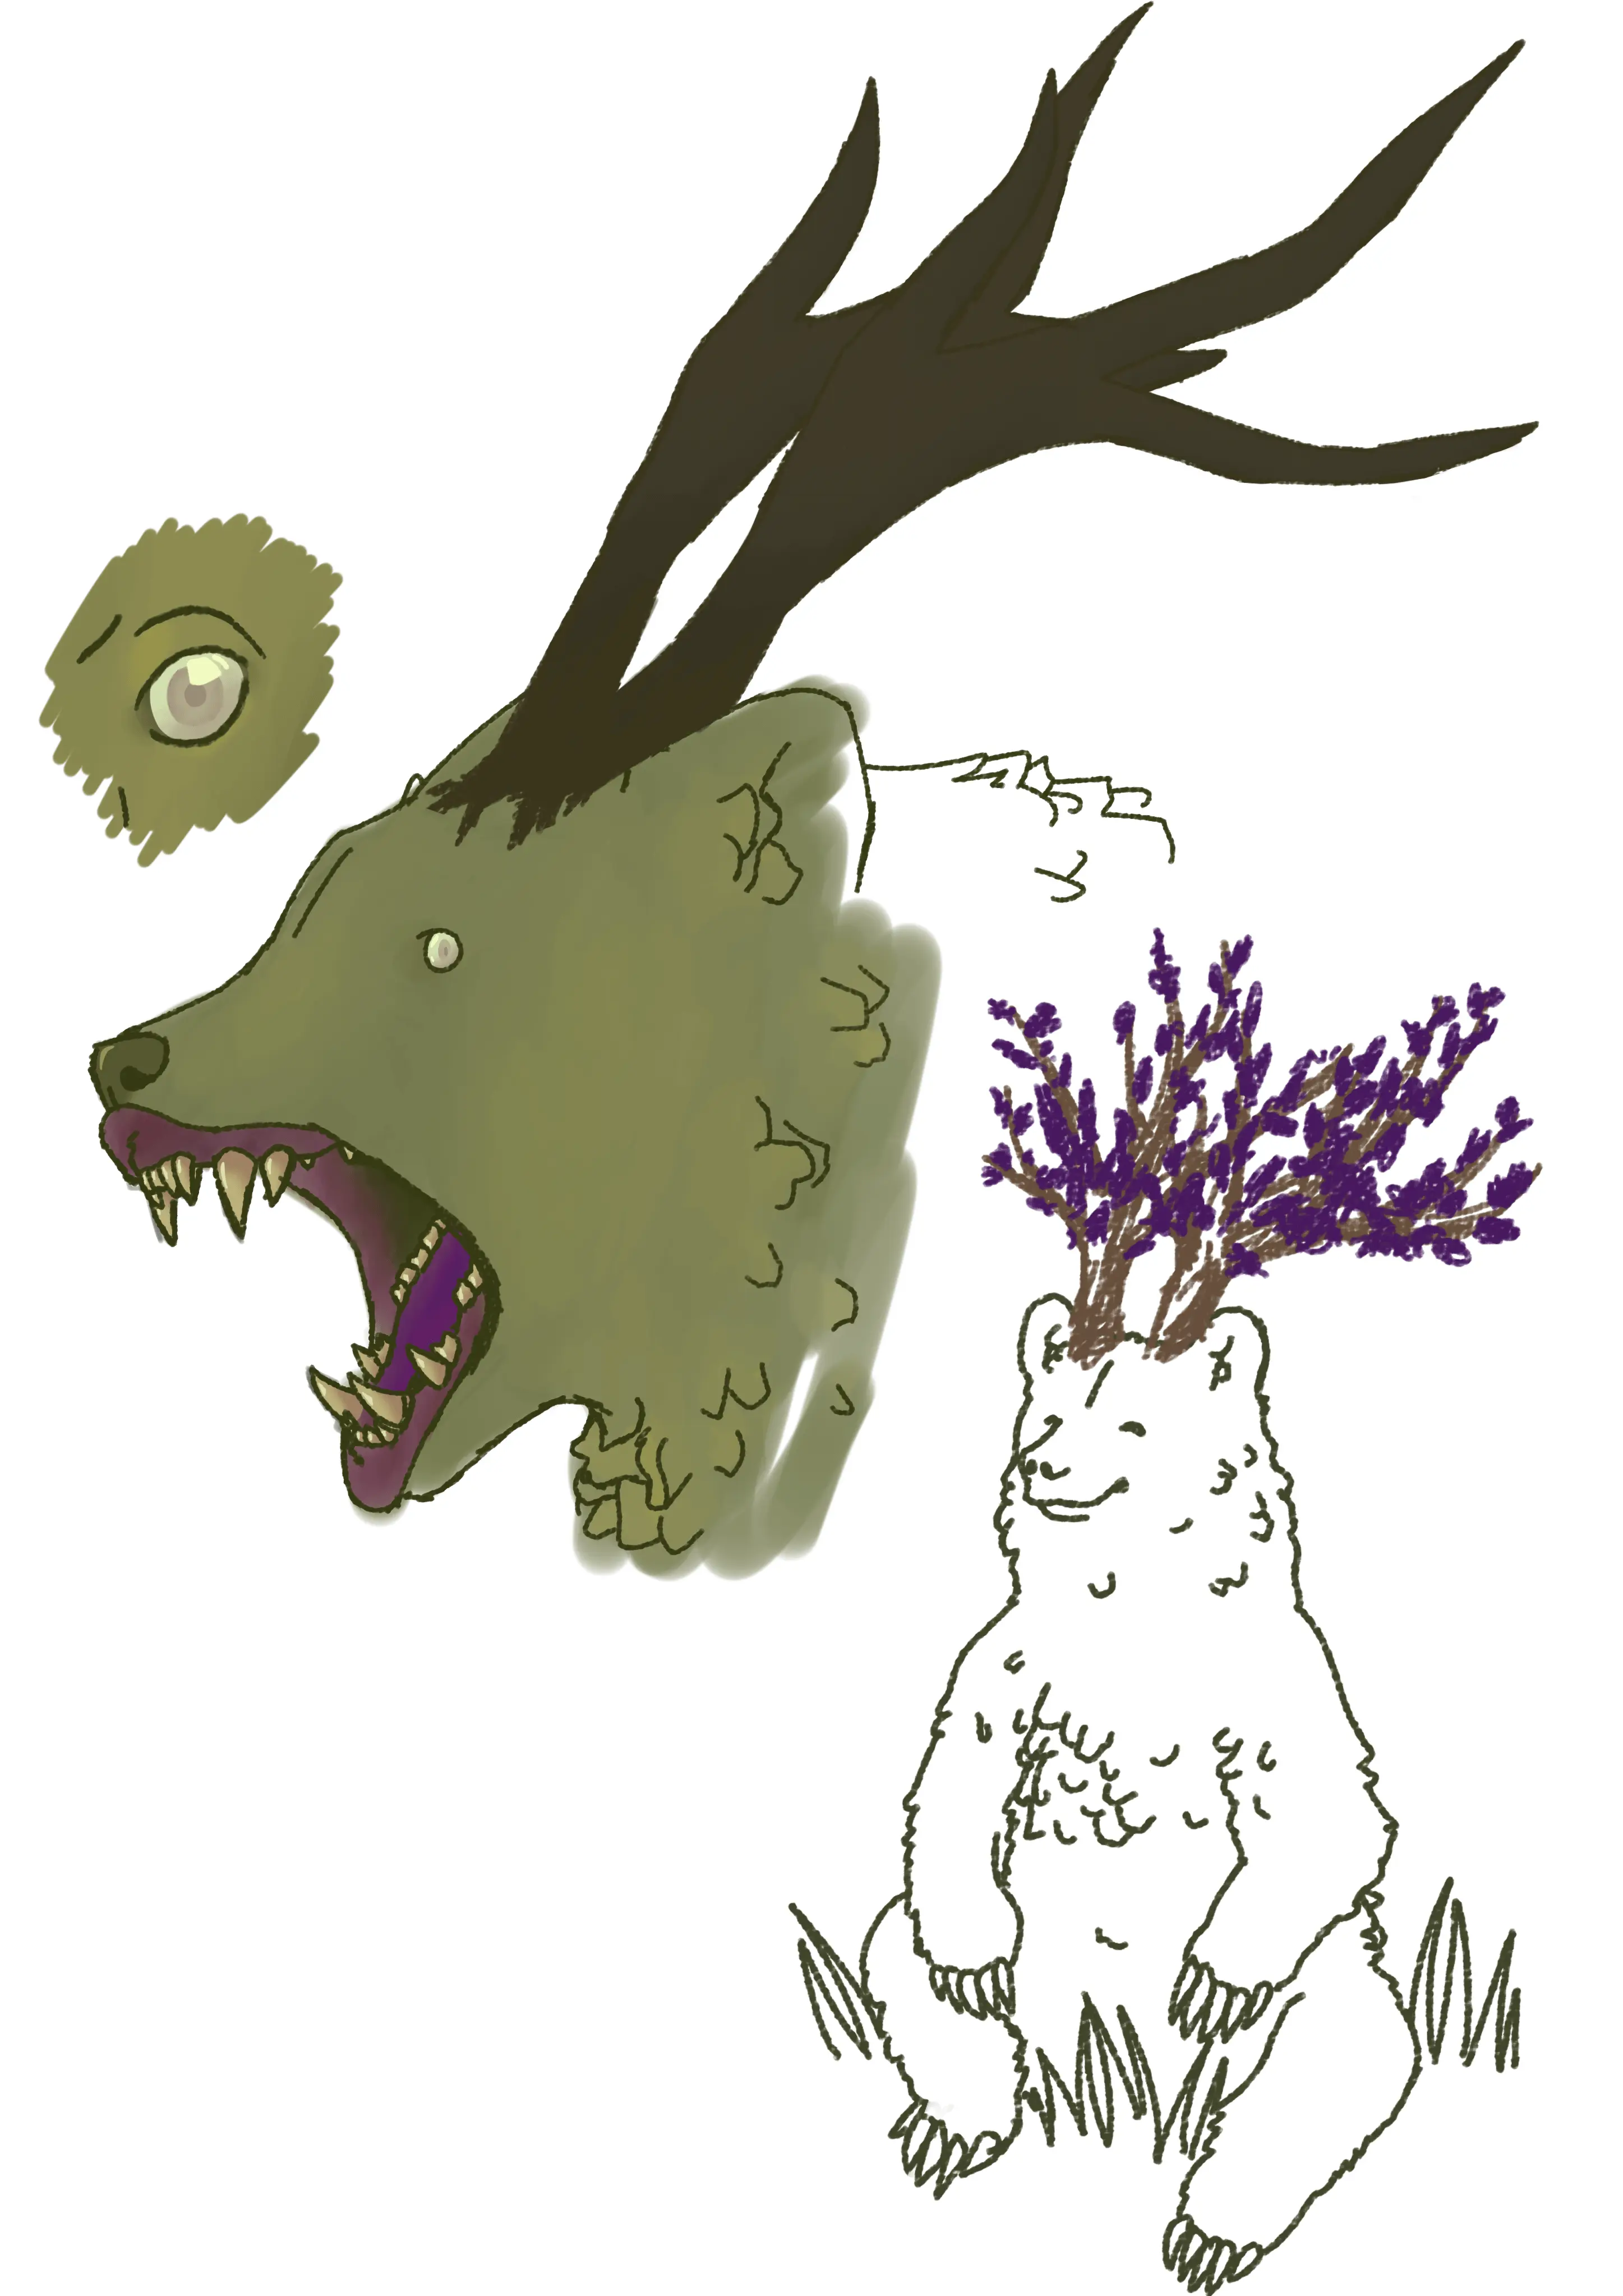 An illustration bear-like creature, featuring green lichen instead of fur and tree-like horns.